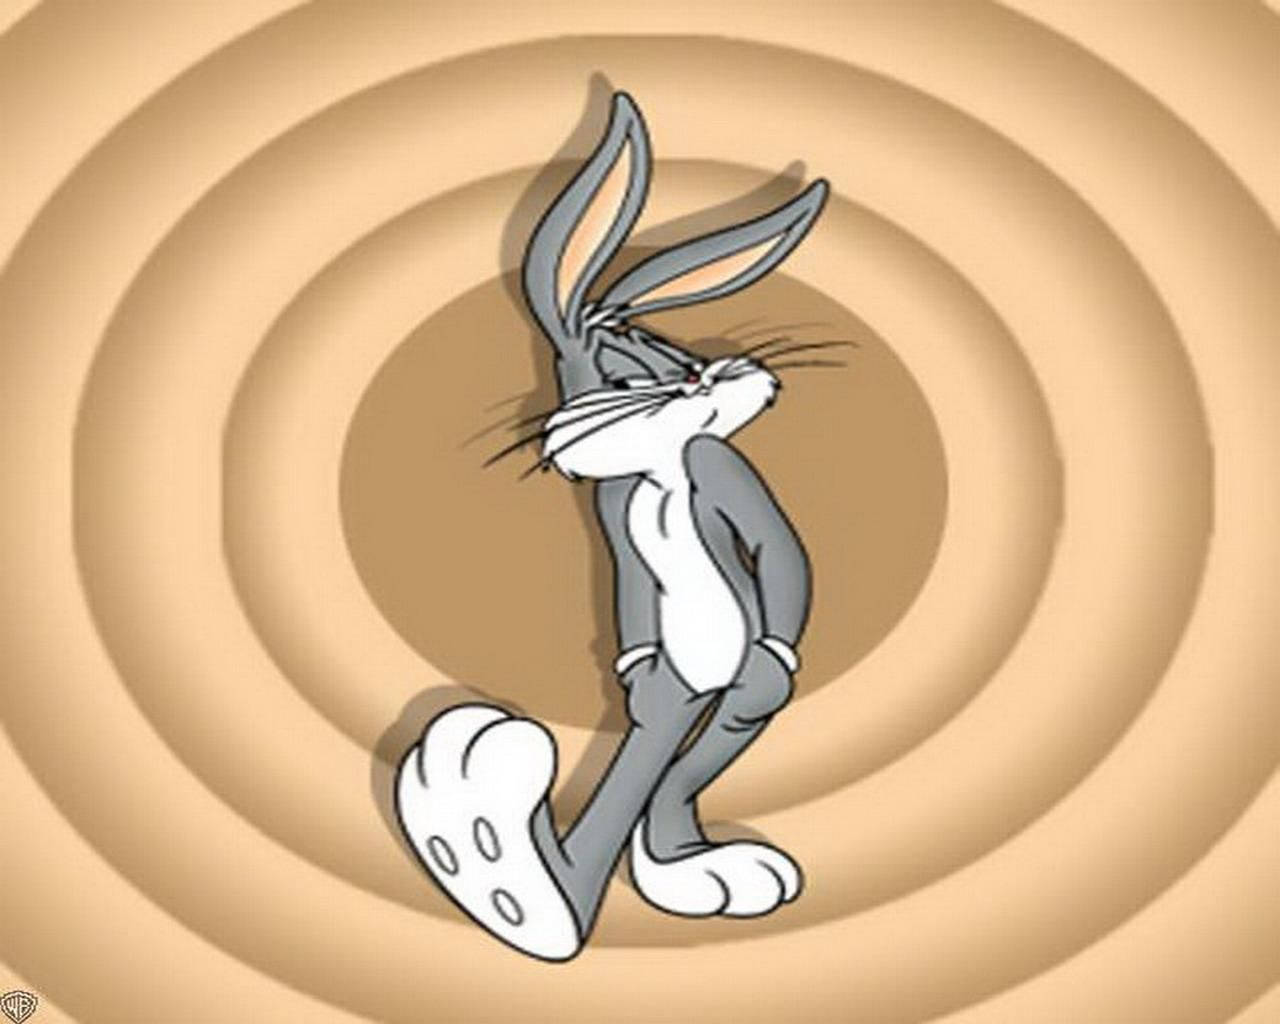 1280X1024 Bugs Bunny Wallpaper and Background